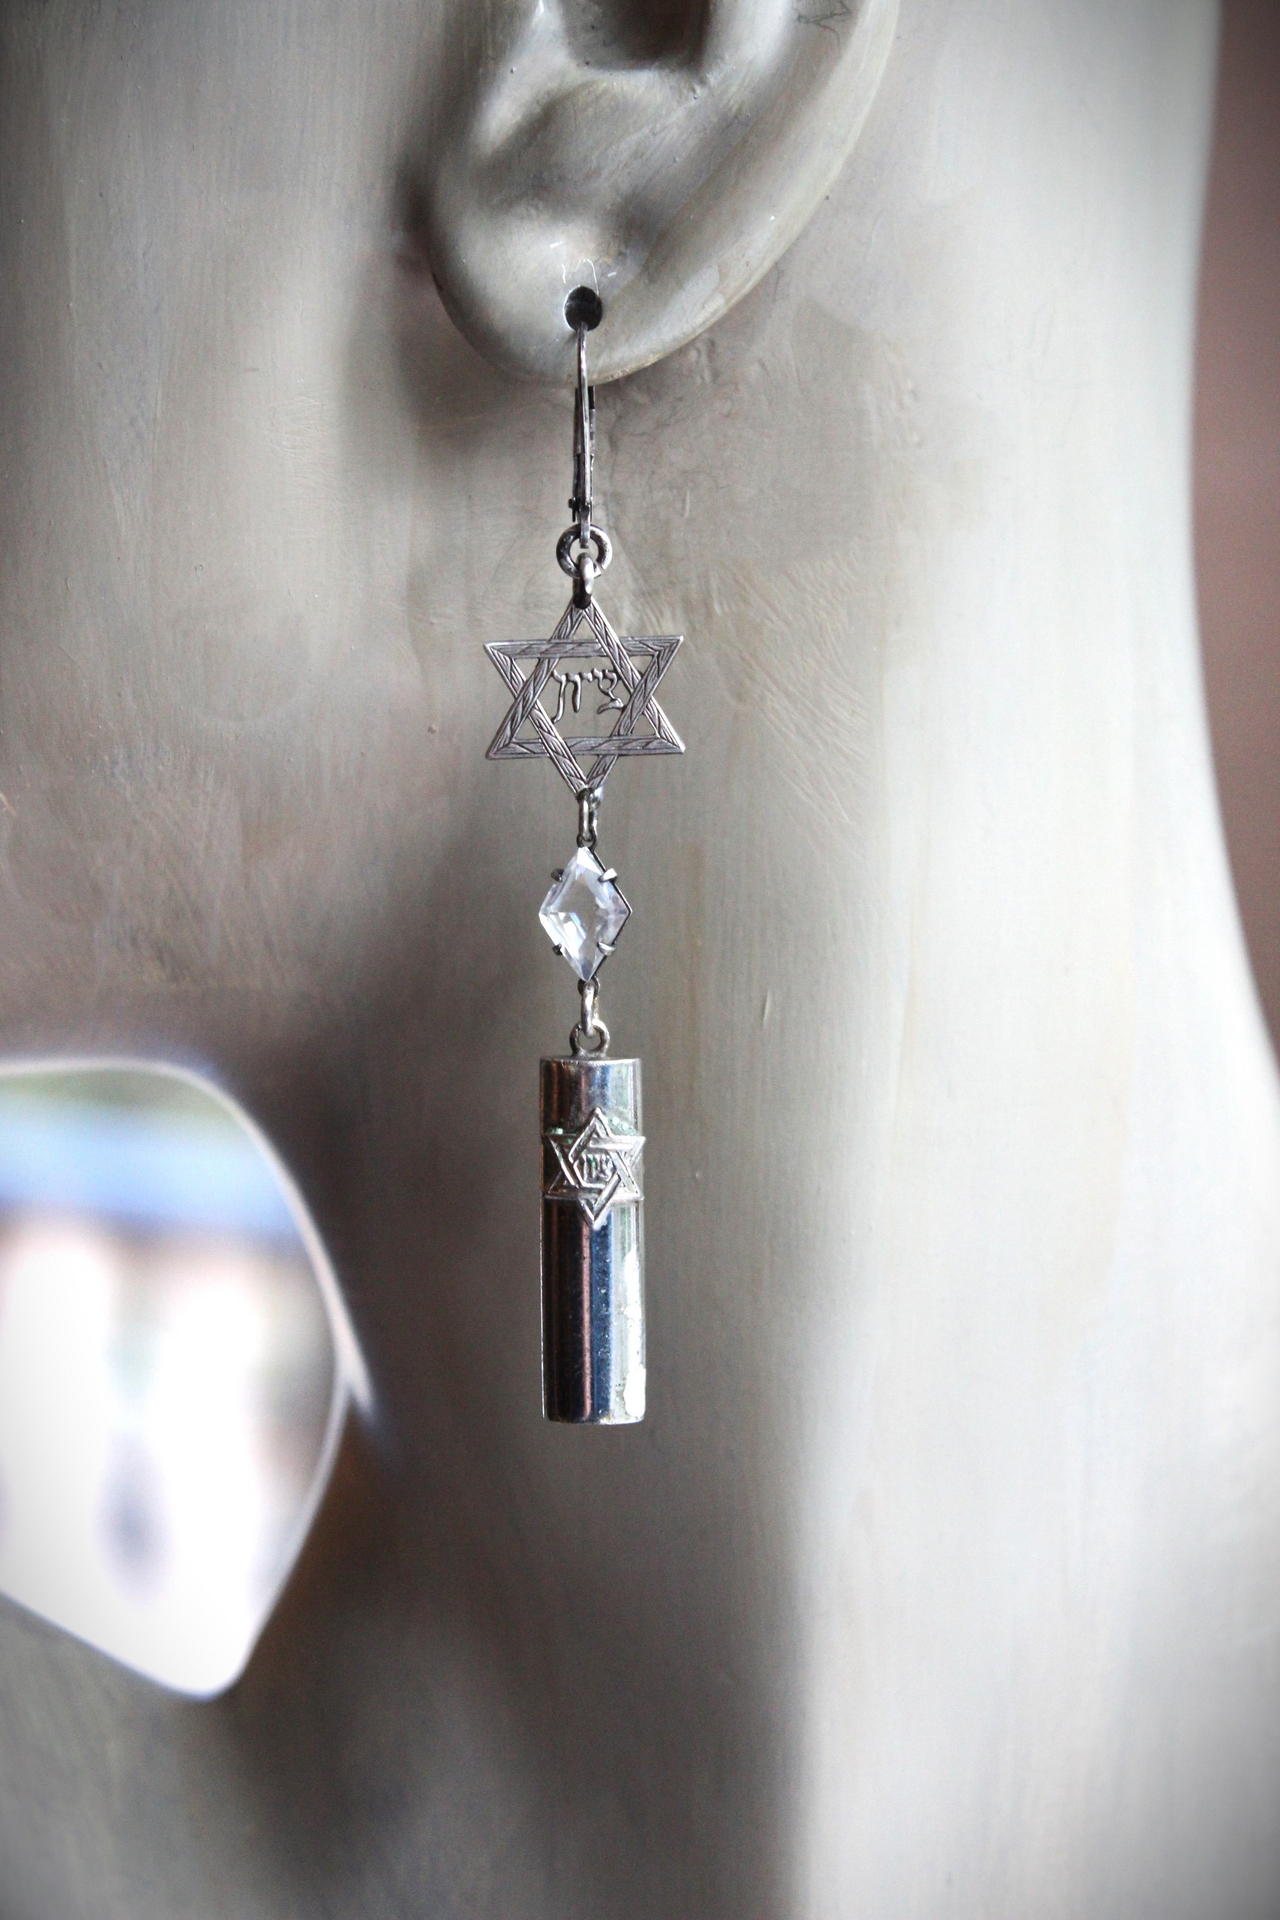 Covenant with God Earrings with Antique Sterling Star of David and Mezuzah Charms. Antique Faceted Rock Crystal Connectors, Sterling Earring Wires